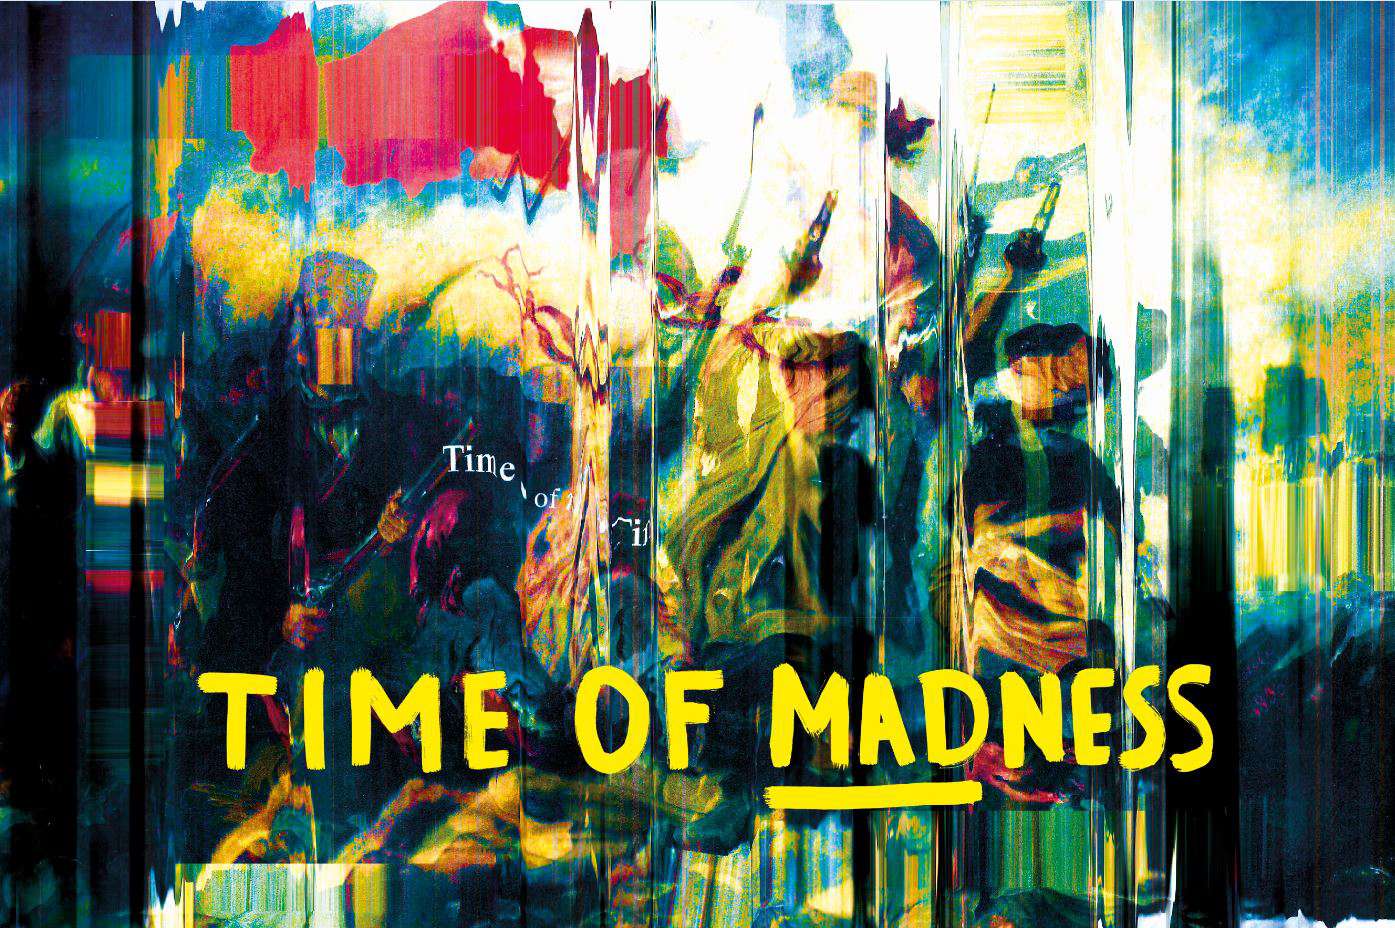 haleixendre timeofmadness photographiecollagemonotype pop_art theartcycle photo_detail_1.jpg The Art Cycle